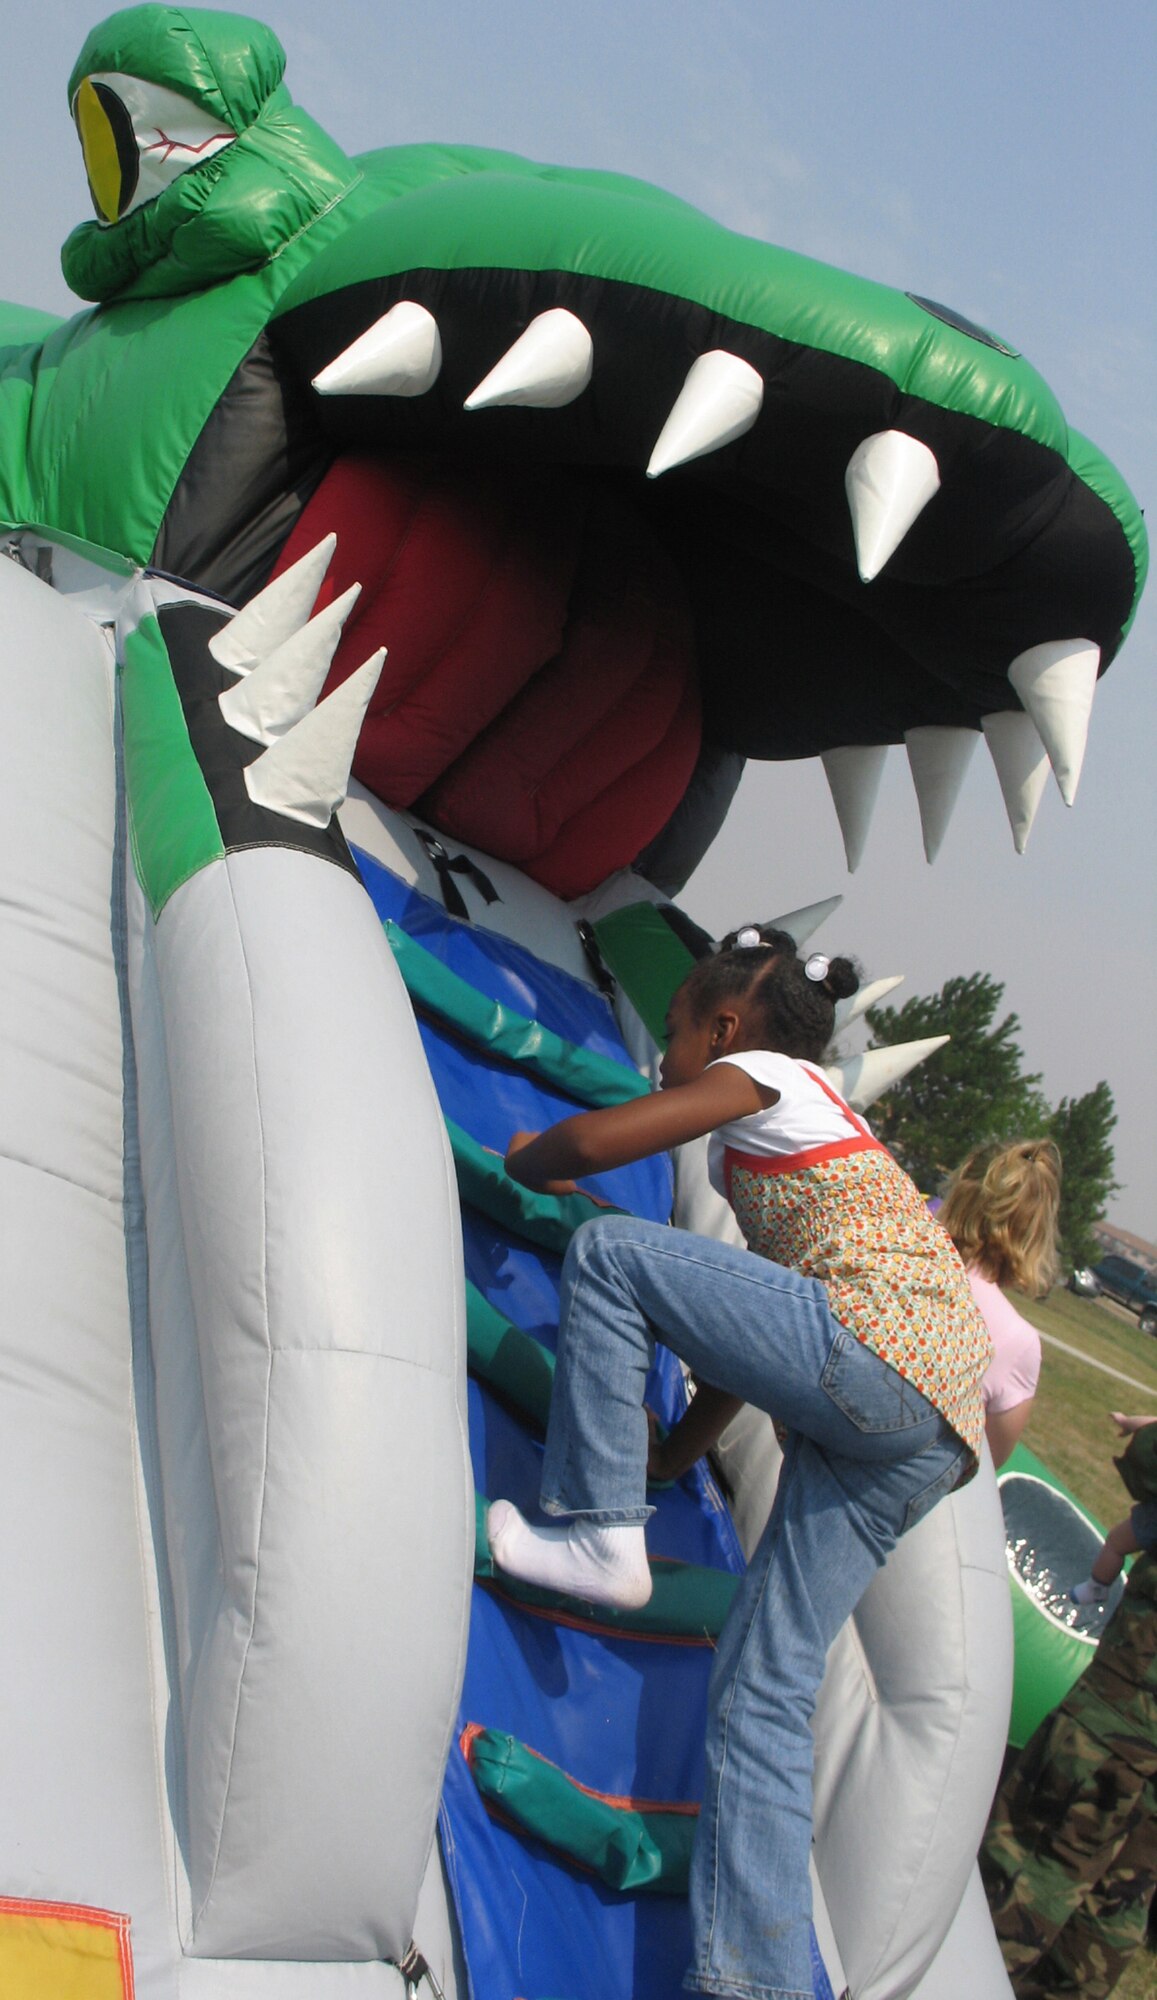 The daughter of an Ellsworth Airman braves the climb into the mouth of an inflatable dragon that housed a maze of activity during the Ellsworth base picnic Aug. 20. This annual family-friendly event was sponsored primarily by local businesses as a way to say thank you to active-duty Airmen, retirees, Department of Defense civilians and families for their hard work, dedication and sacrifices. (U.S. Air Force photo/Staff Sgt. Shanda De Anda)